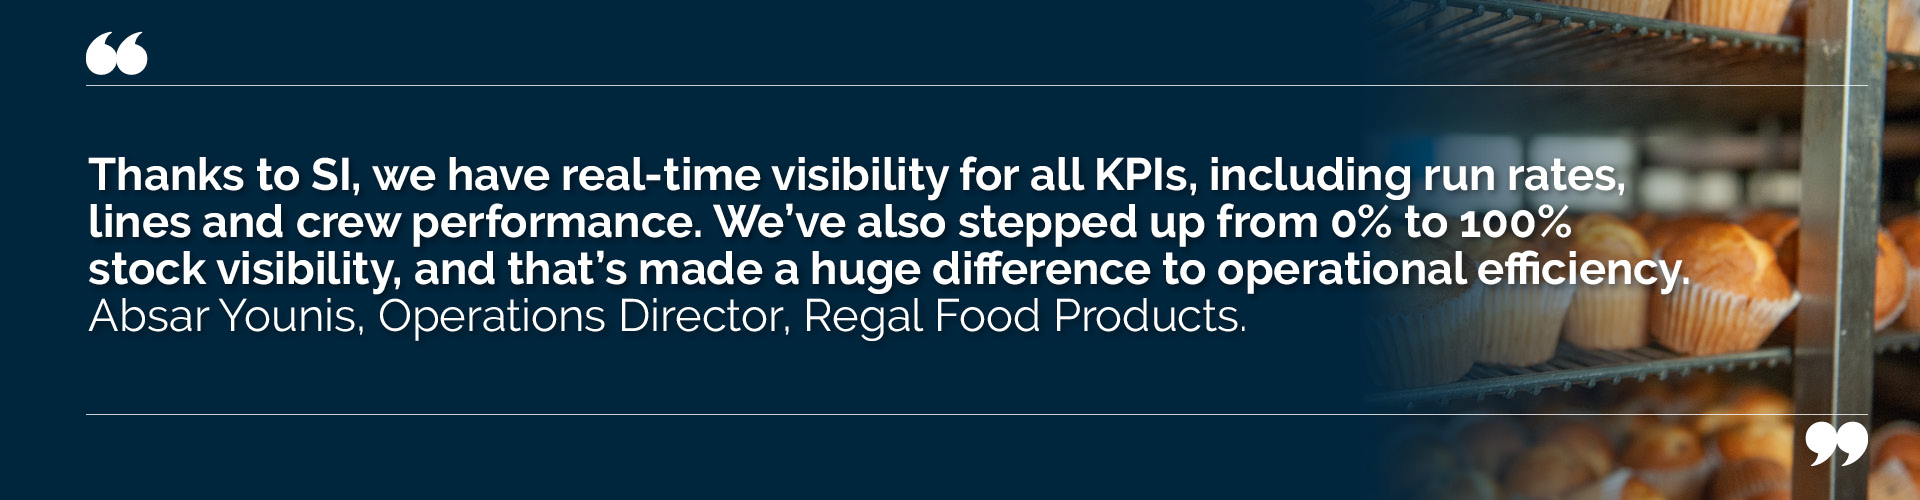 Quote from Absar Younis, Operations Director, Regal Foods